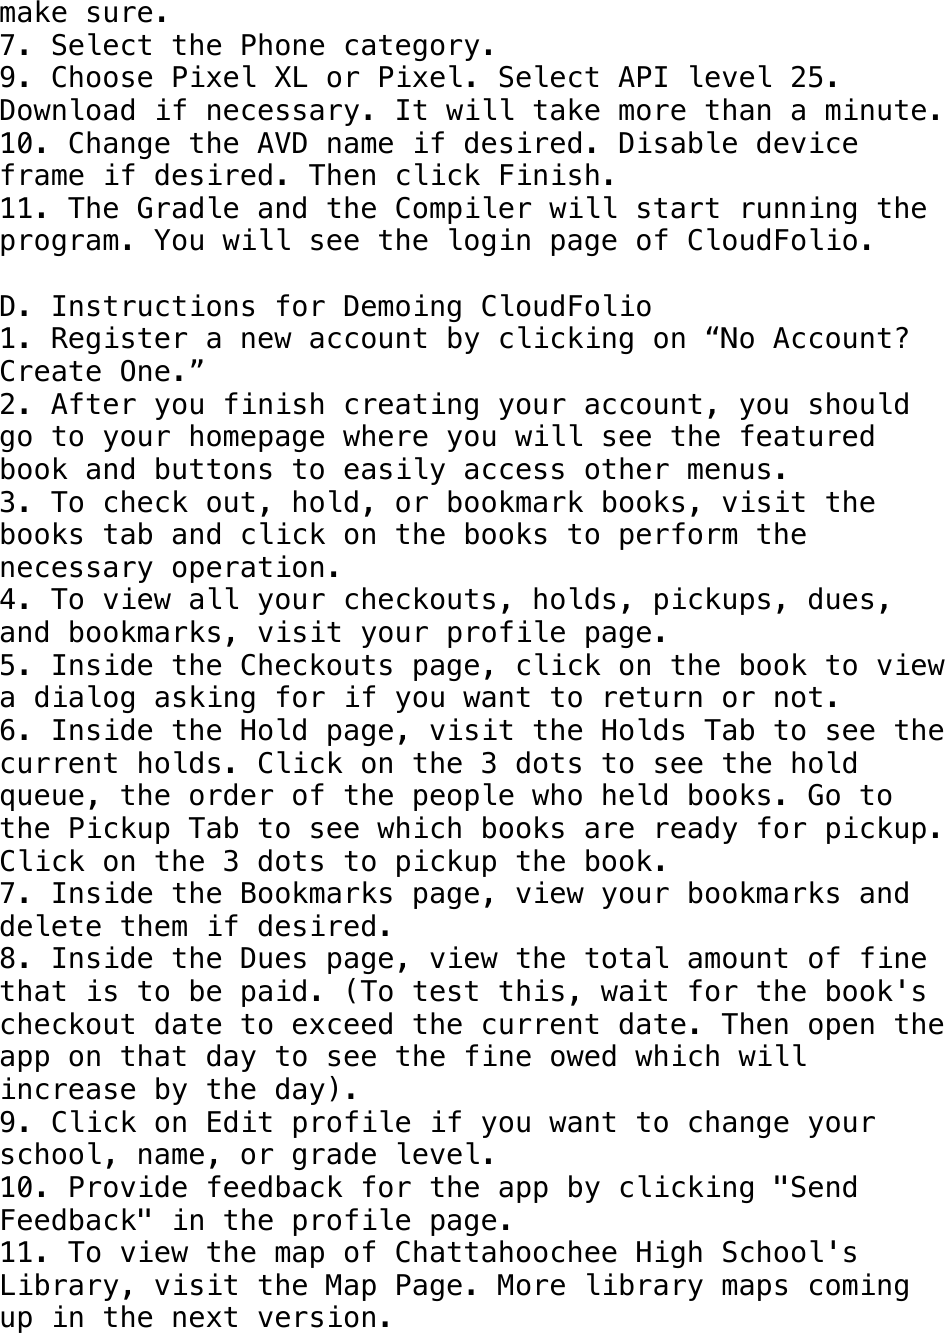 Page 9 of 10 - Cloud Folio Instructions